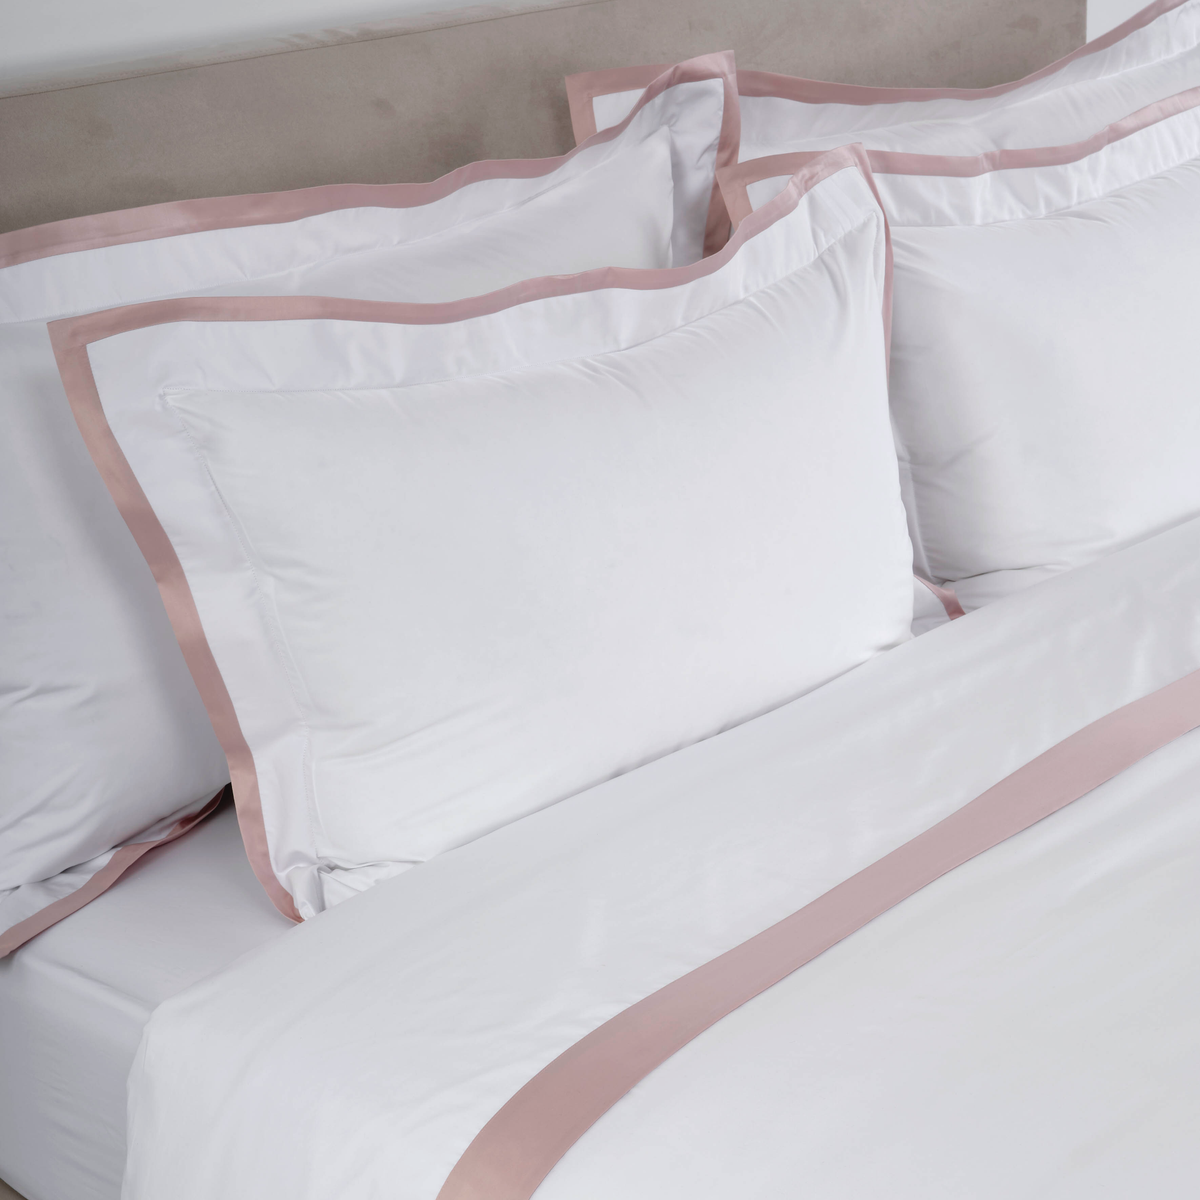 Pillowcases of Celso de Lemos Hella Bedding in Nuage Rose Color